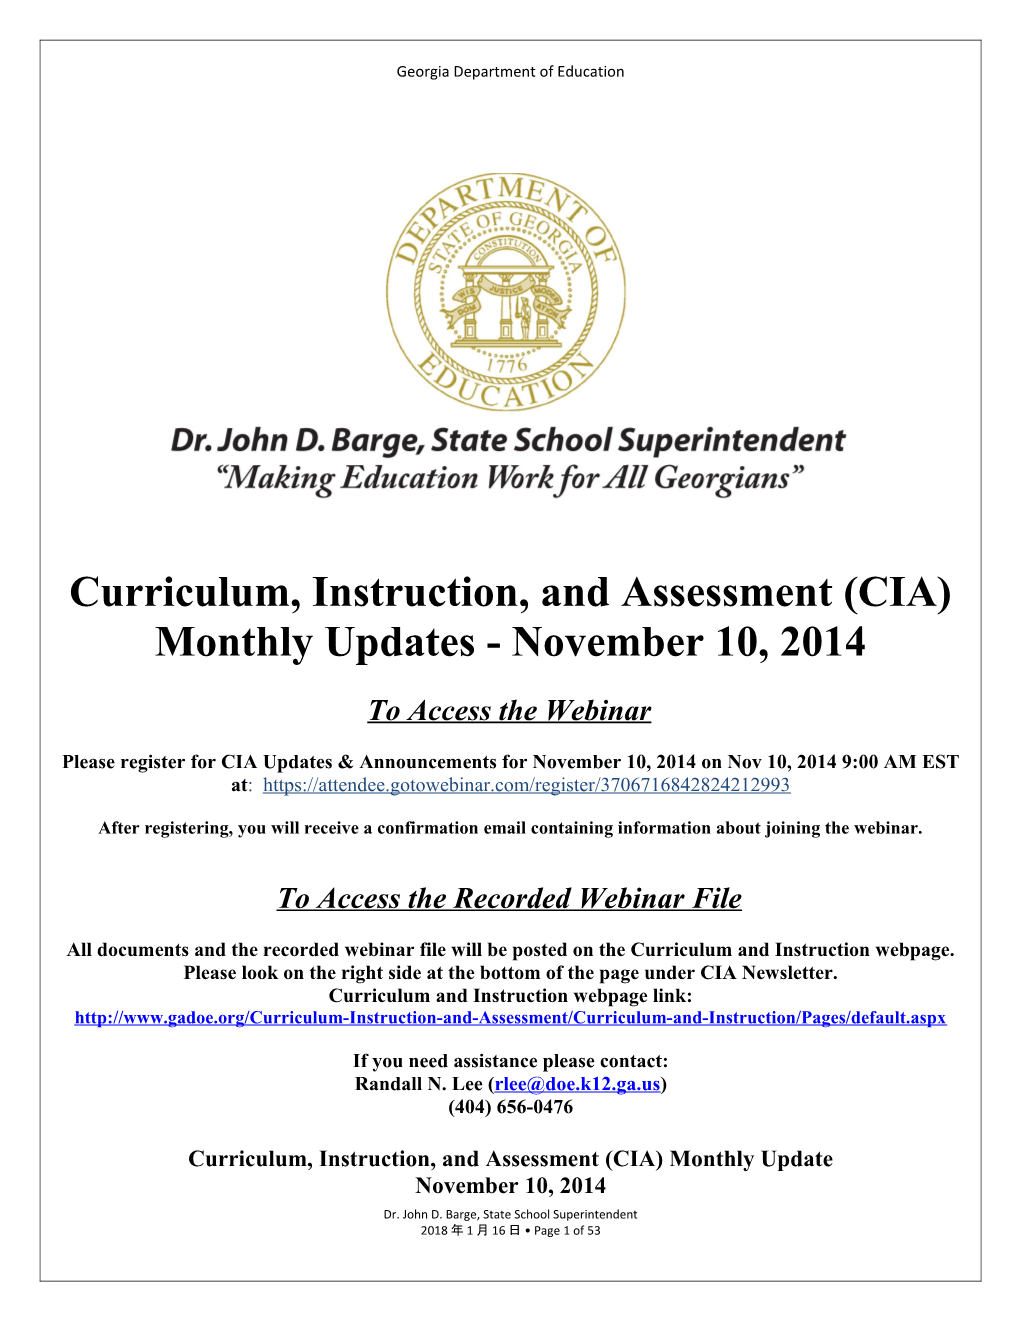 Curriculum, Instruction, and Assessment (CIA) Monthly Updates - November 10, 2014